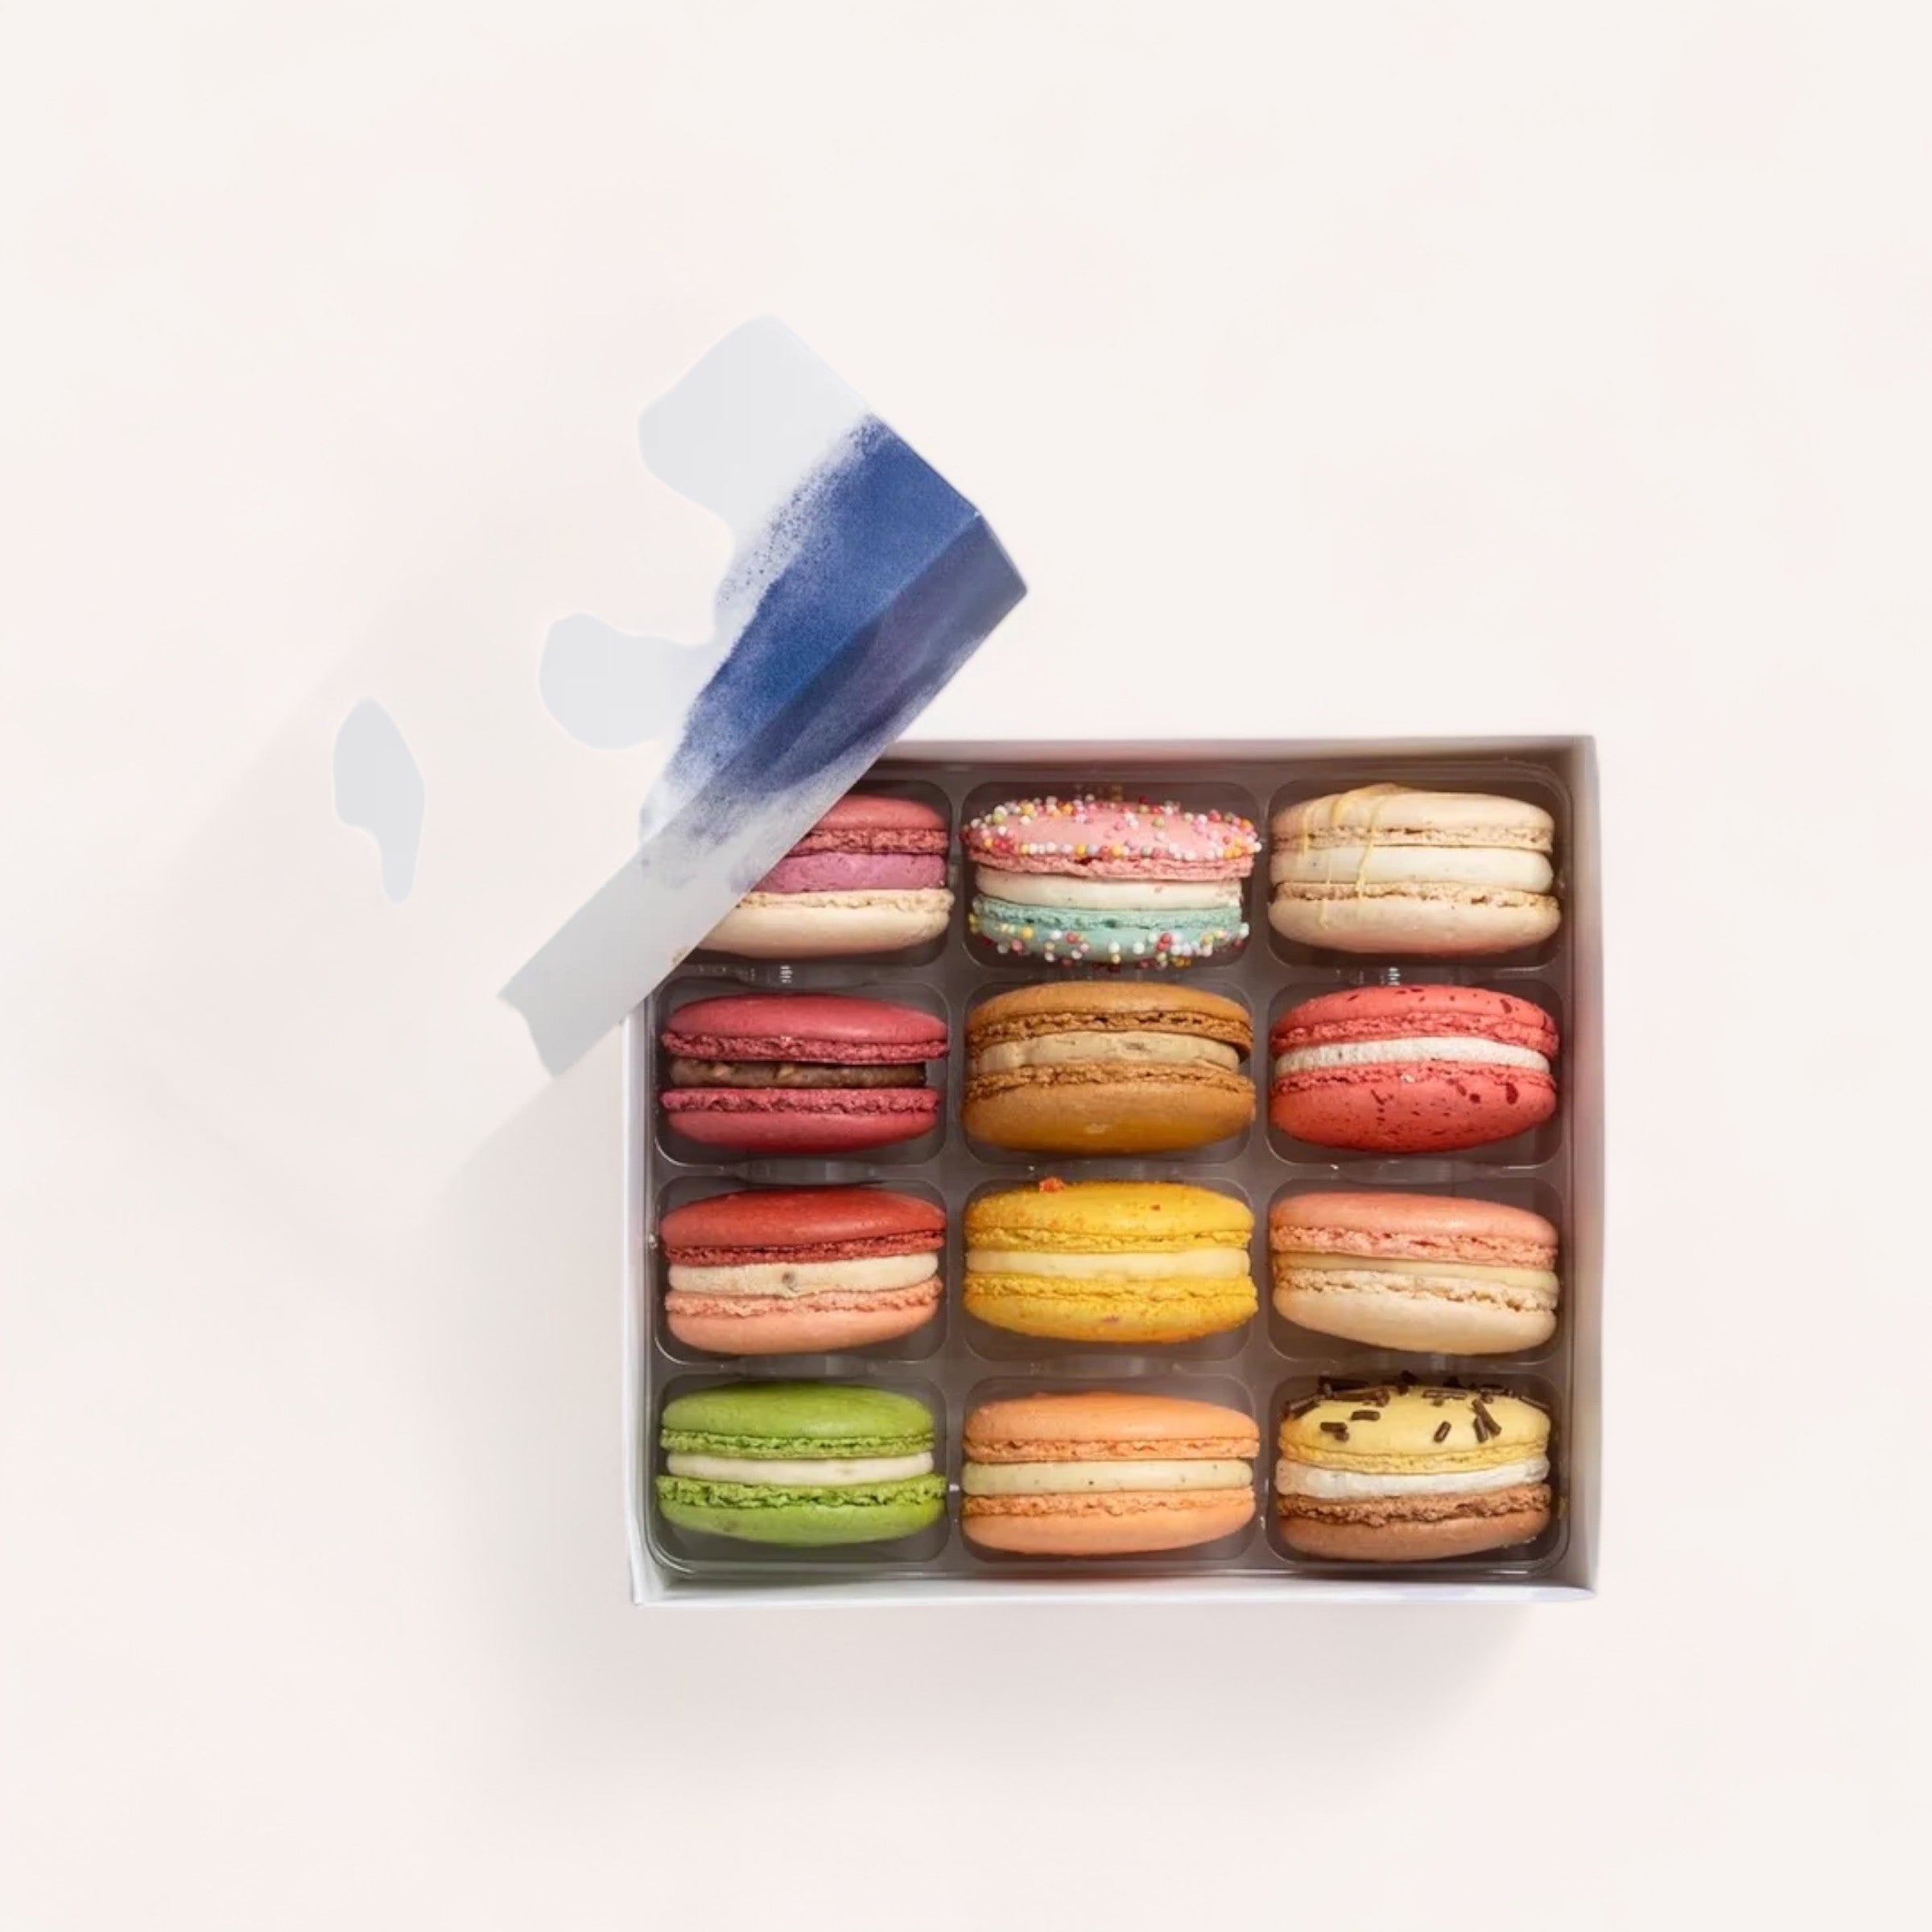 An assortment of colorful, handmade macarons from Christchurch, New Zealand, neatly arranged in a Box of 12 Macarons by J'aime les Macarons with the lid partially open, showcasing a tempting variety of flavors.